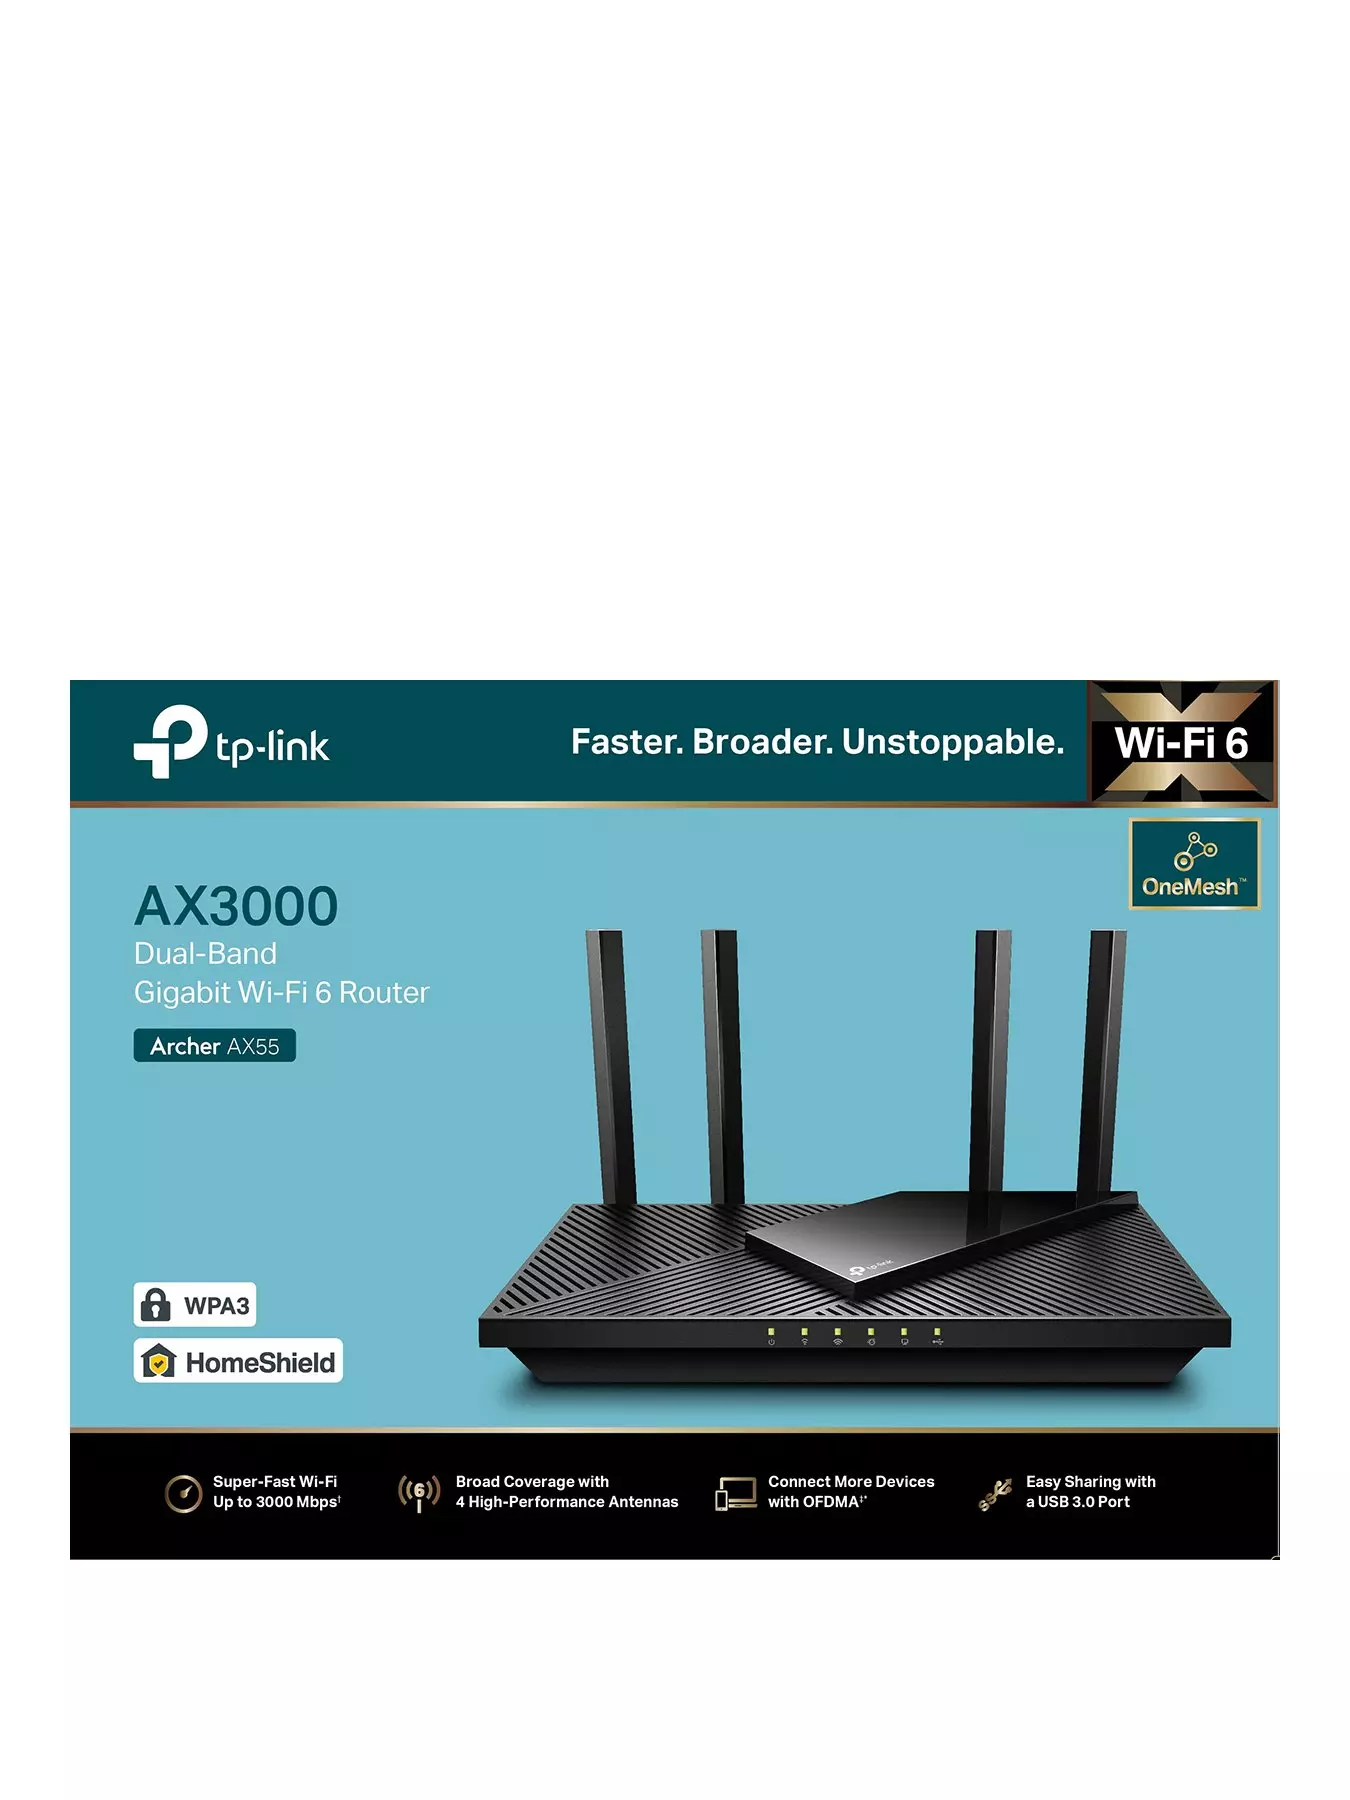 TP-Link DECO M4 - Wi-Fi system (router) - up to 2,800 sq.ft - mesh - GigE -  802.11a/b/g/n/ac - Dual Band 